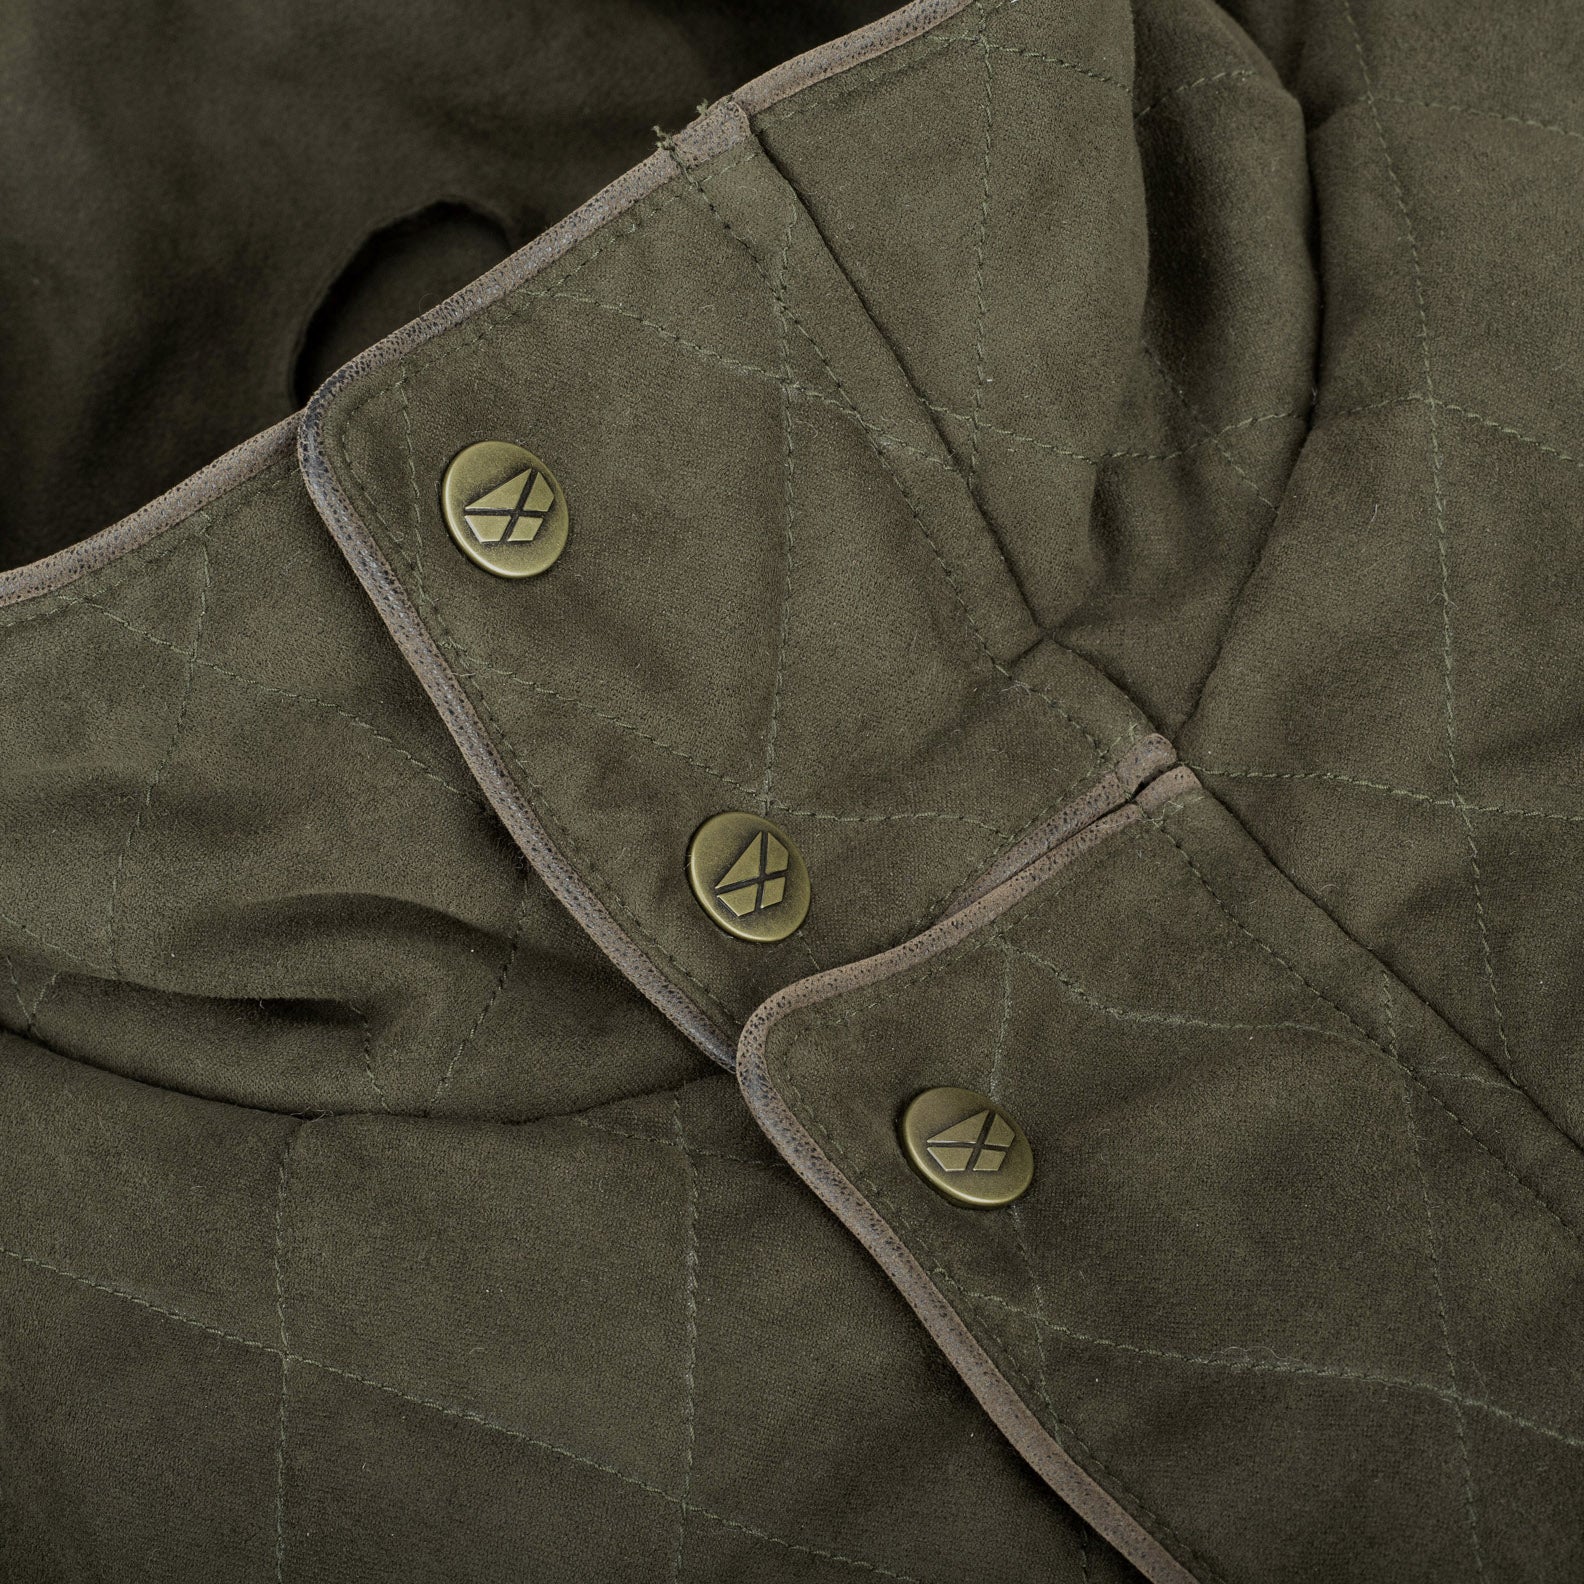 Hoggs-of-Fife-Thornhill-Quilted-Jacket